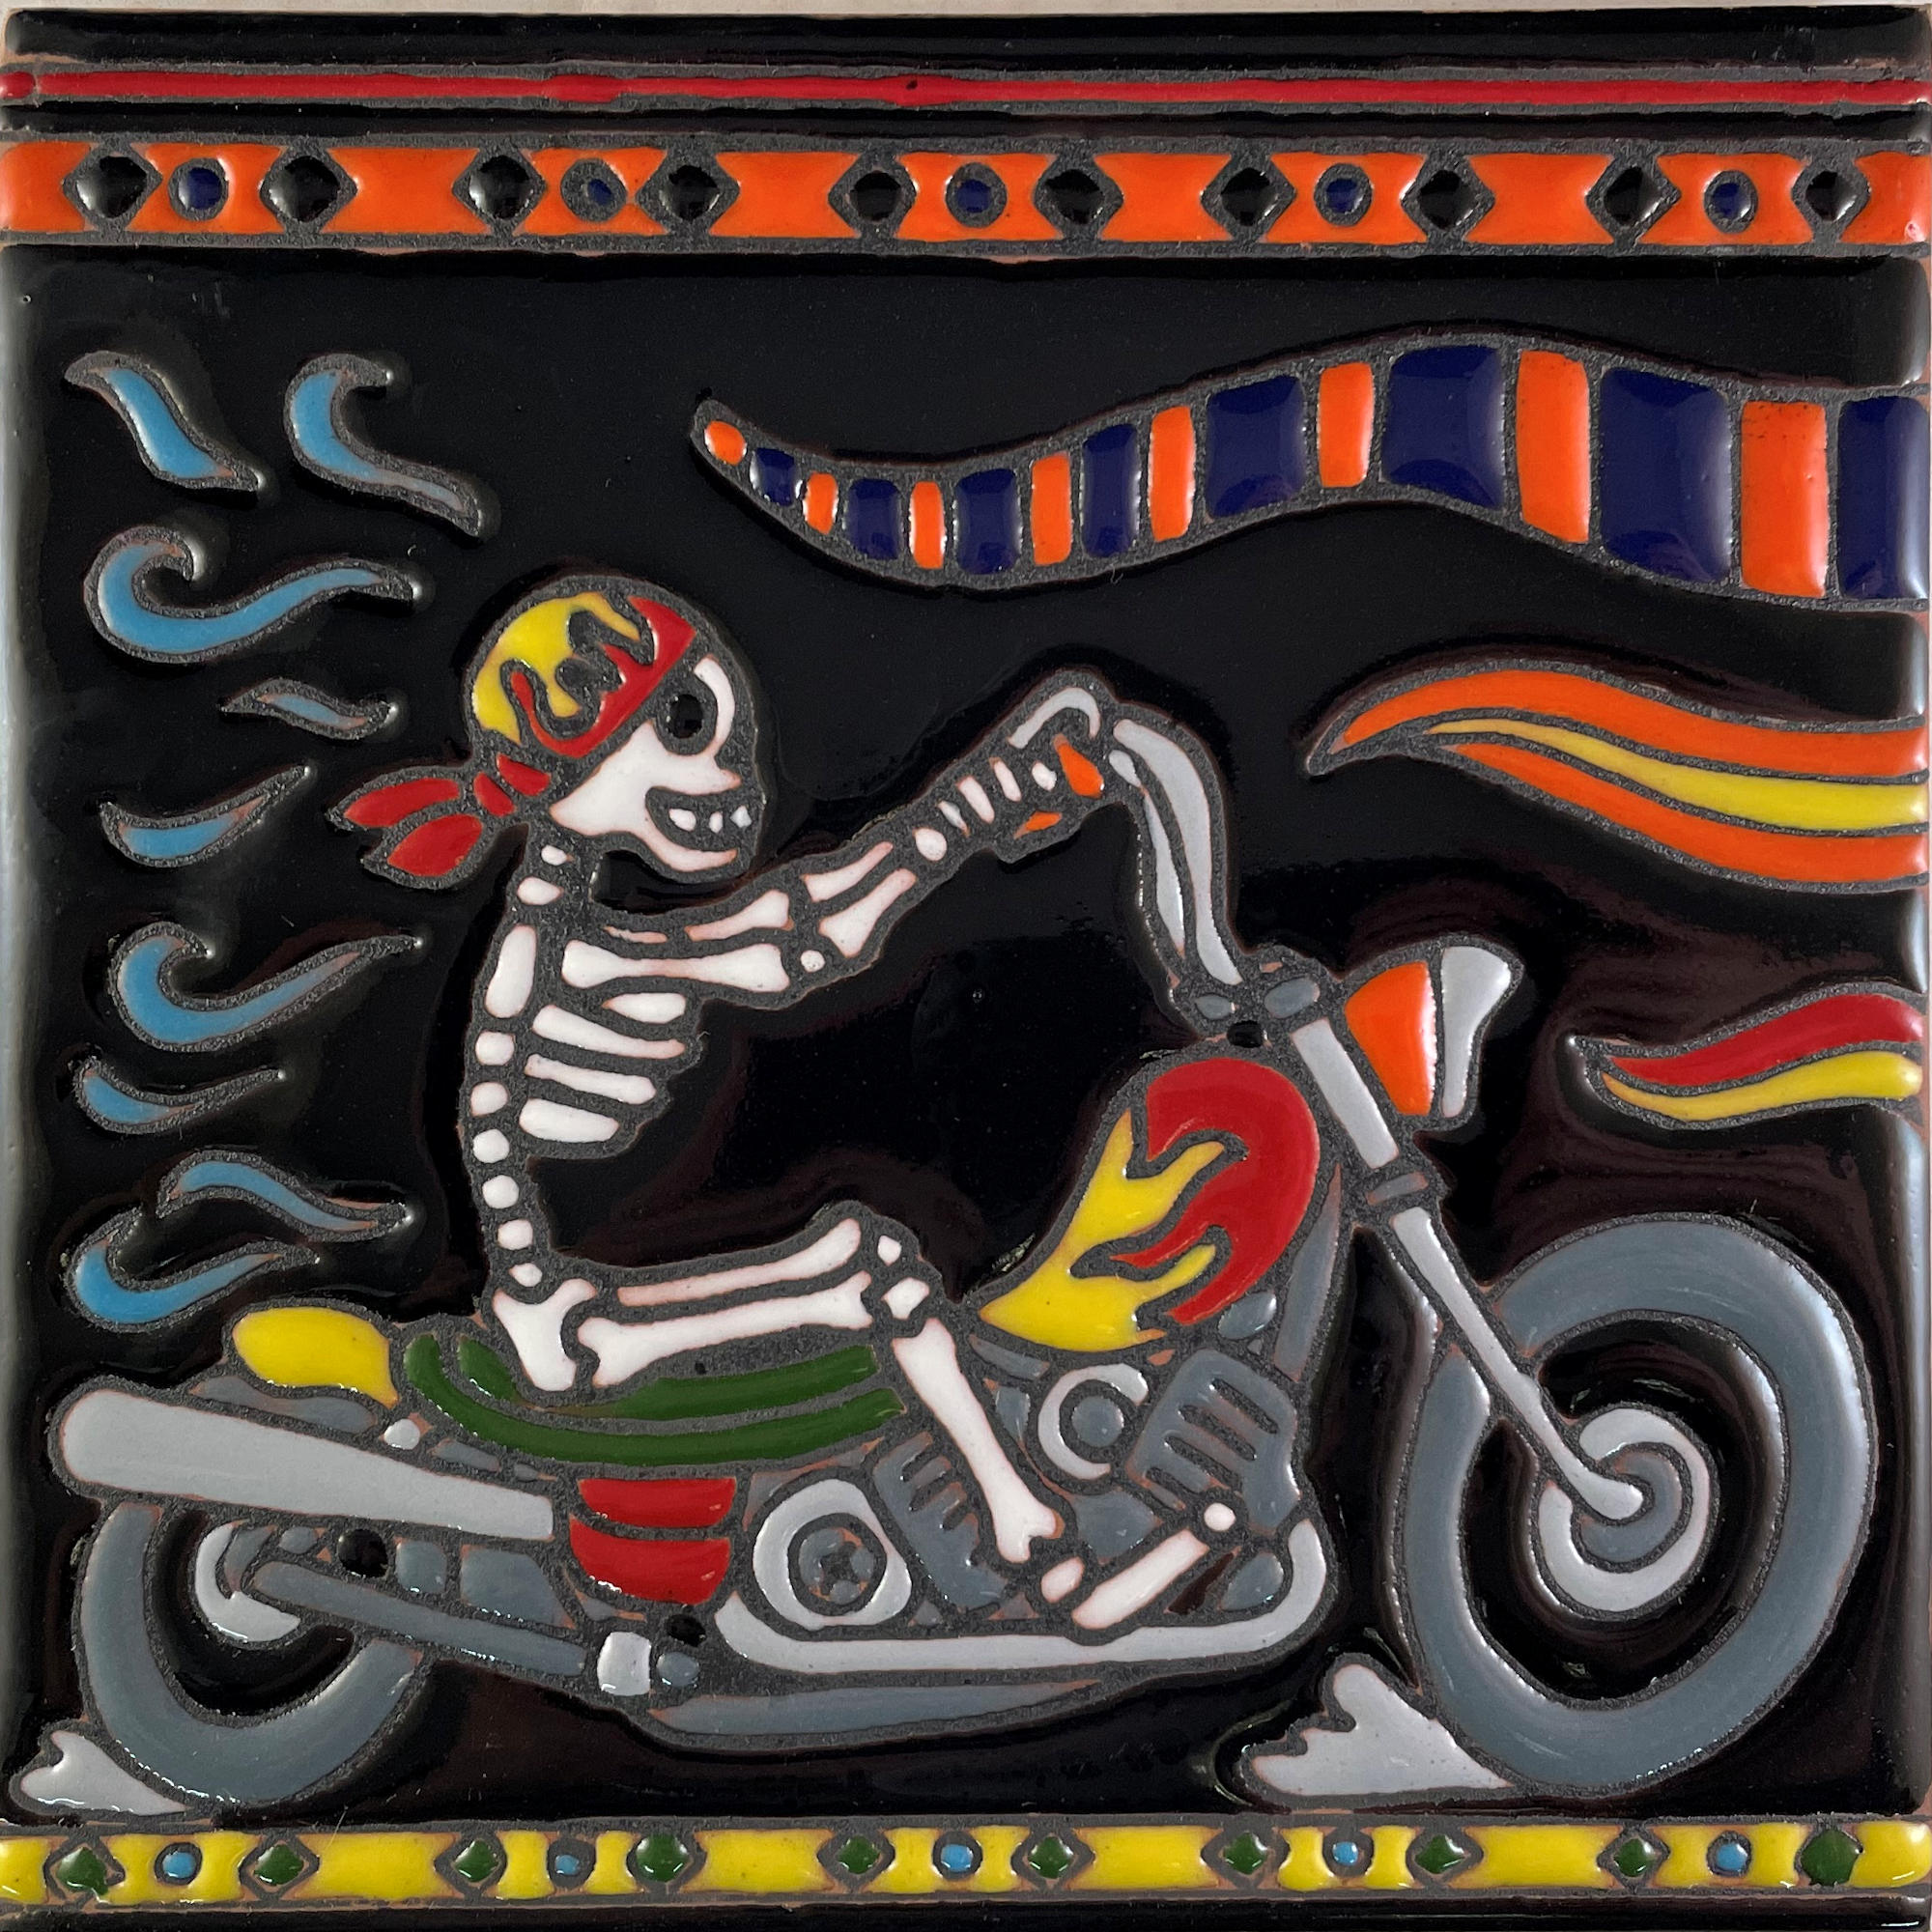 TalaMex Motorcycle Riding. Day-Of-The-Dead Clay Tile